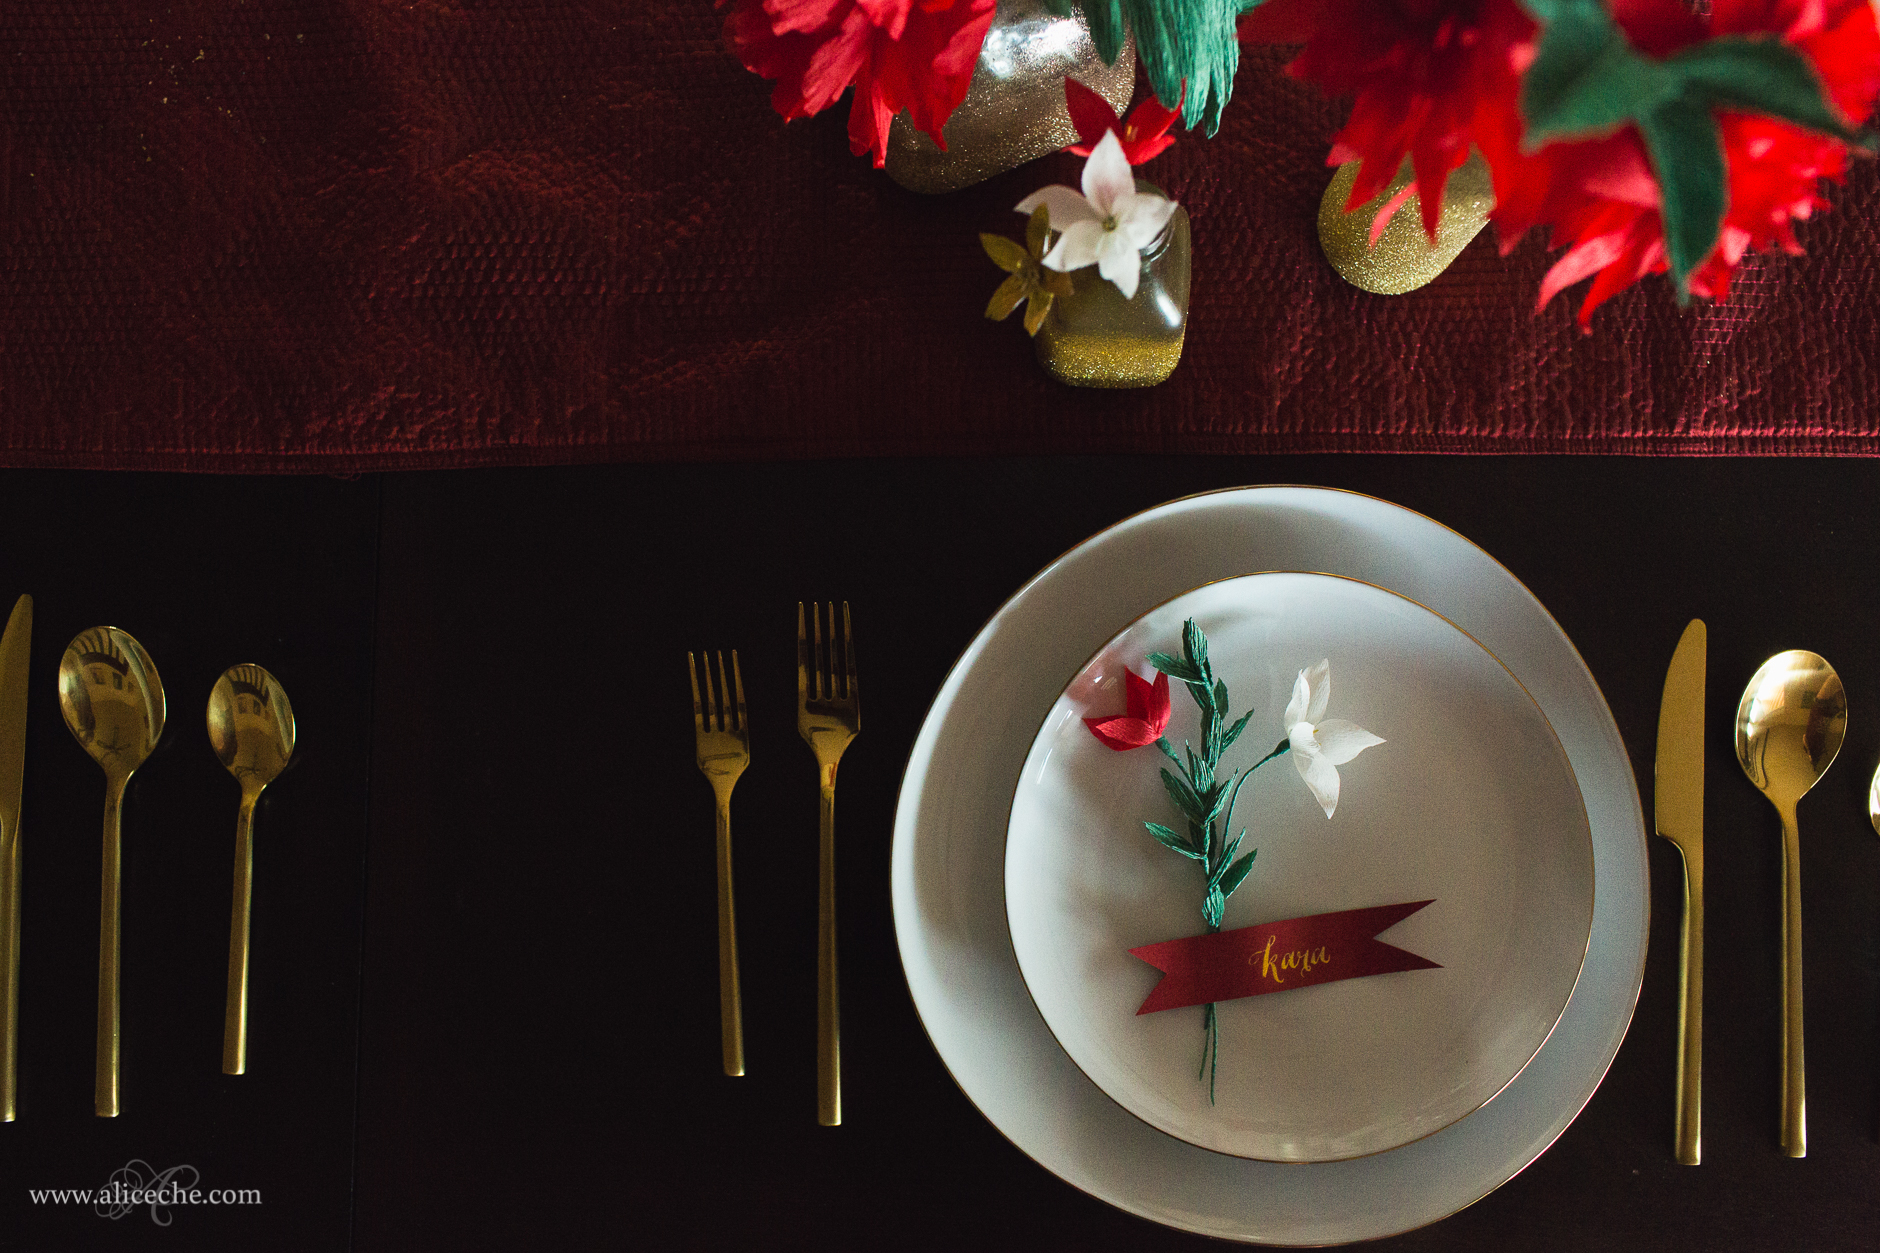 alice-che-photography-christmas-wedding-place-setting-gold-red-white